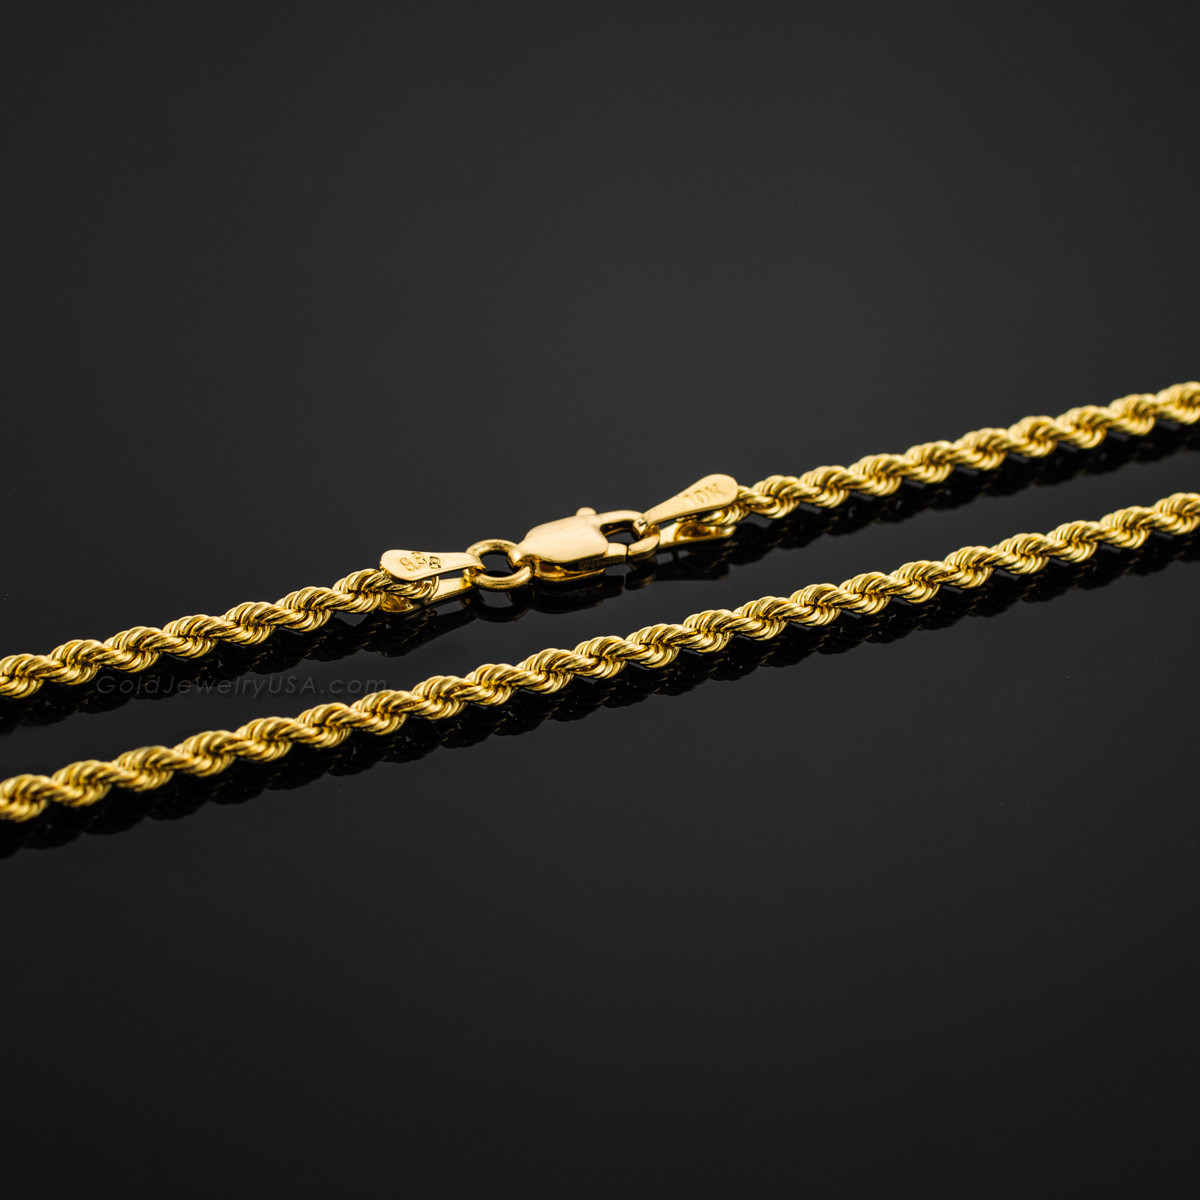 10K Hollow Gold Rope Chain 4MM